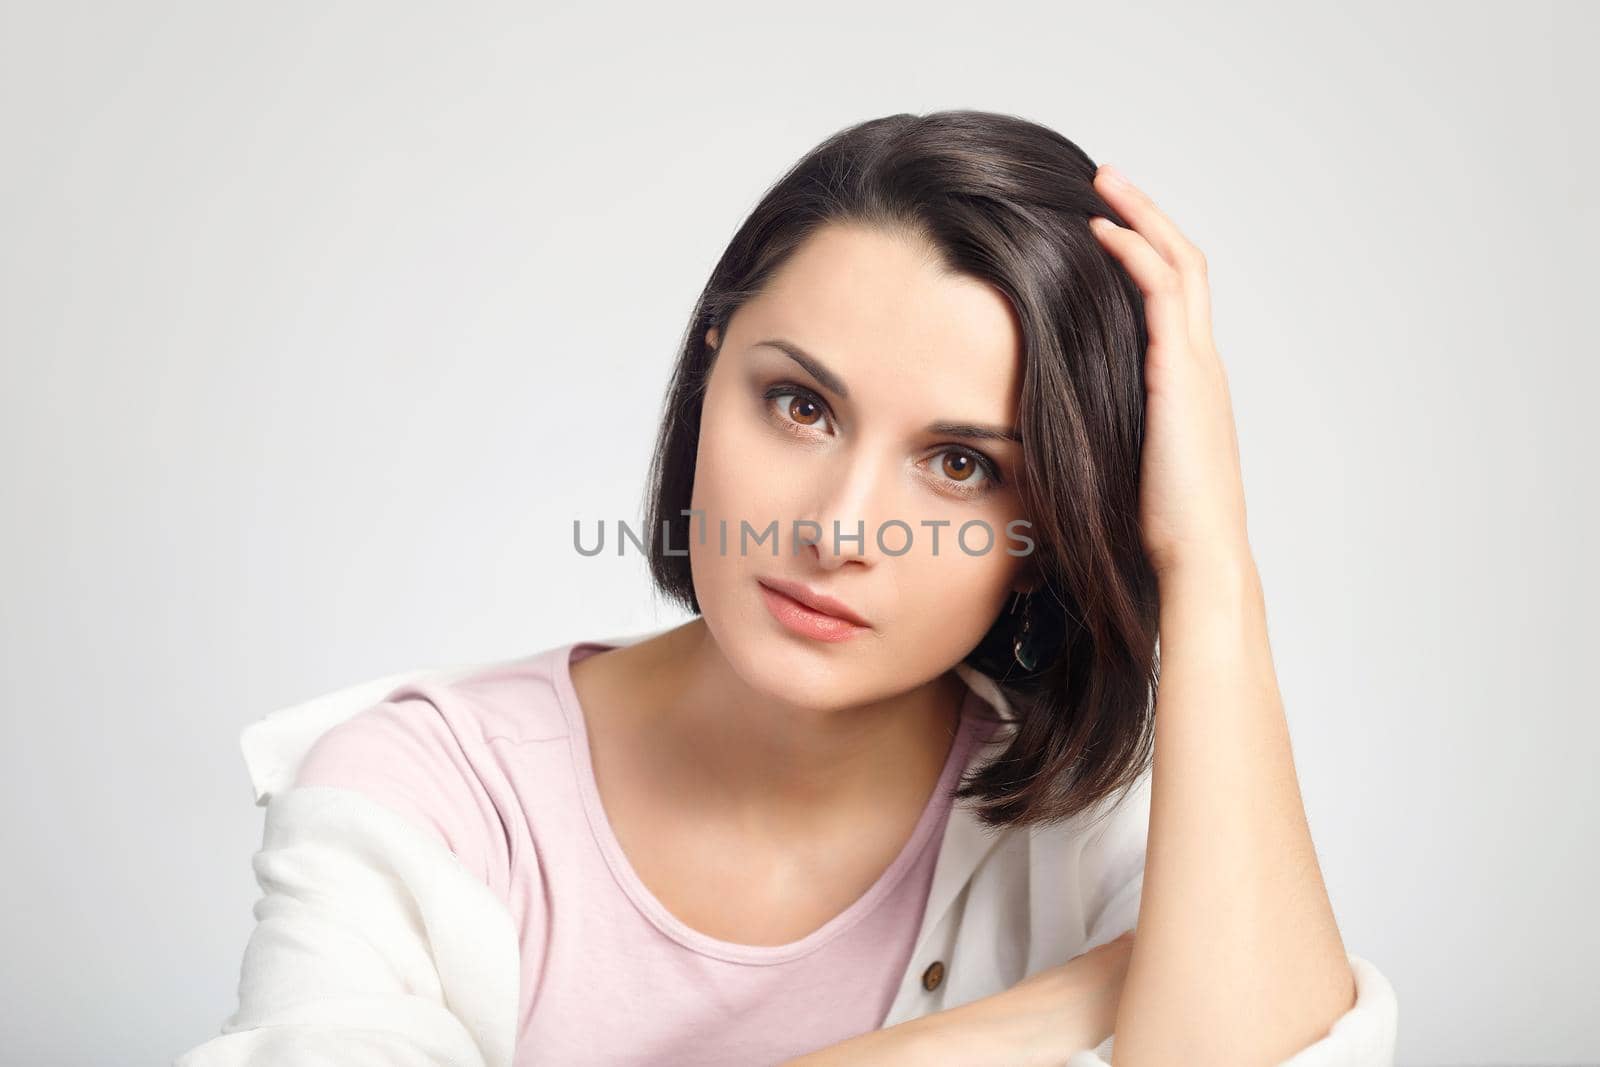 Young multiethnic brunette woman studio portrait. Bright white colors. Beautiful woman with simple makeup looking at the camera. High-key headshot